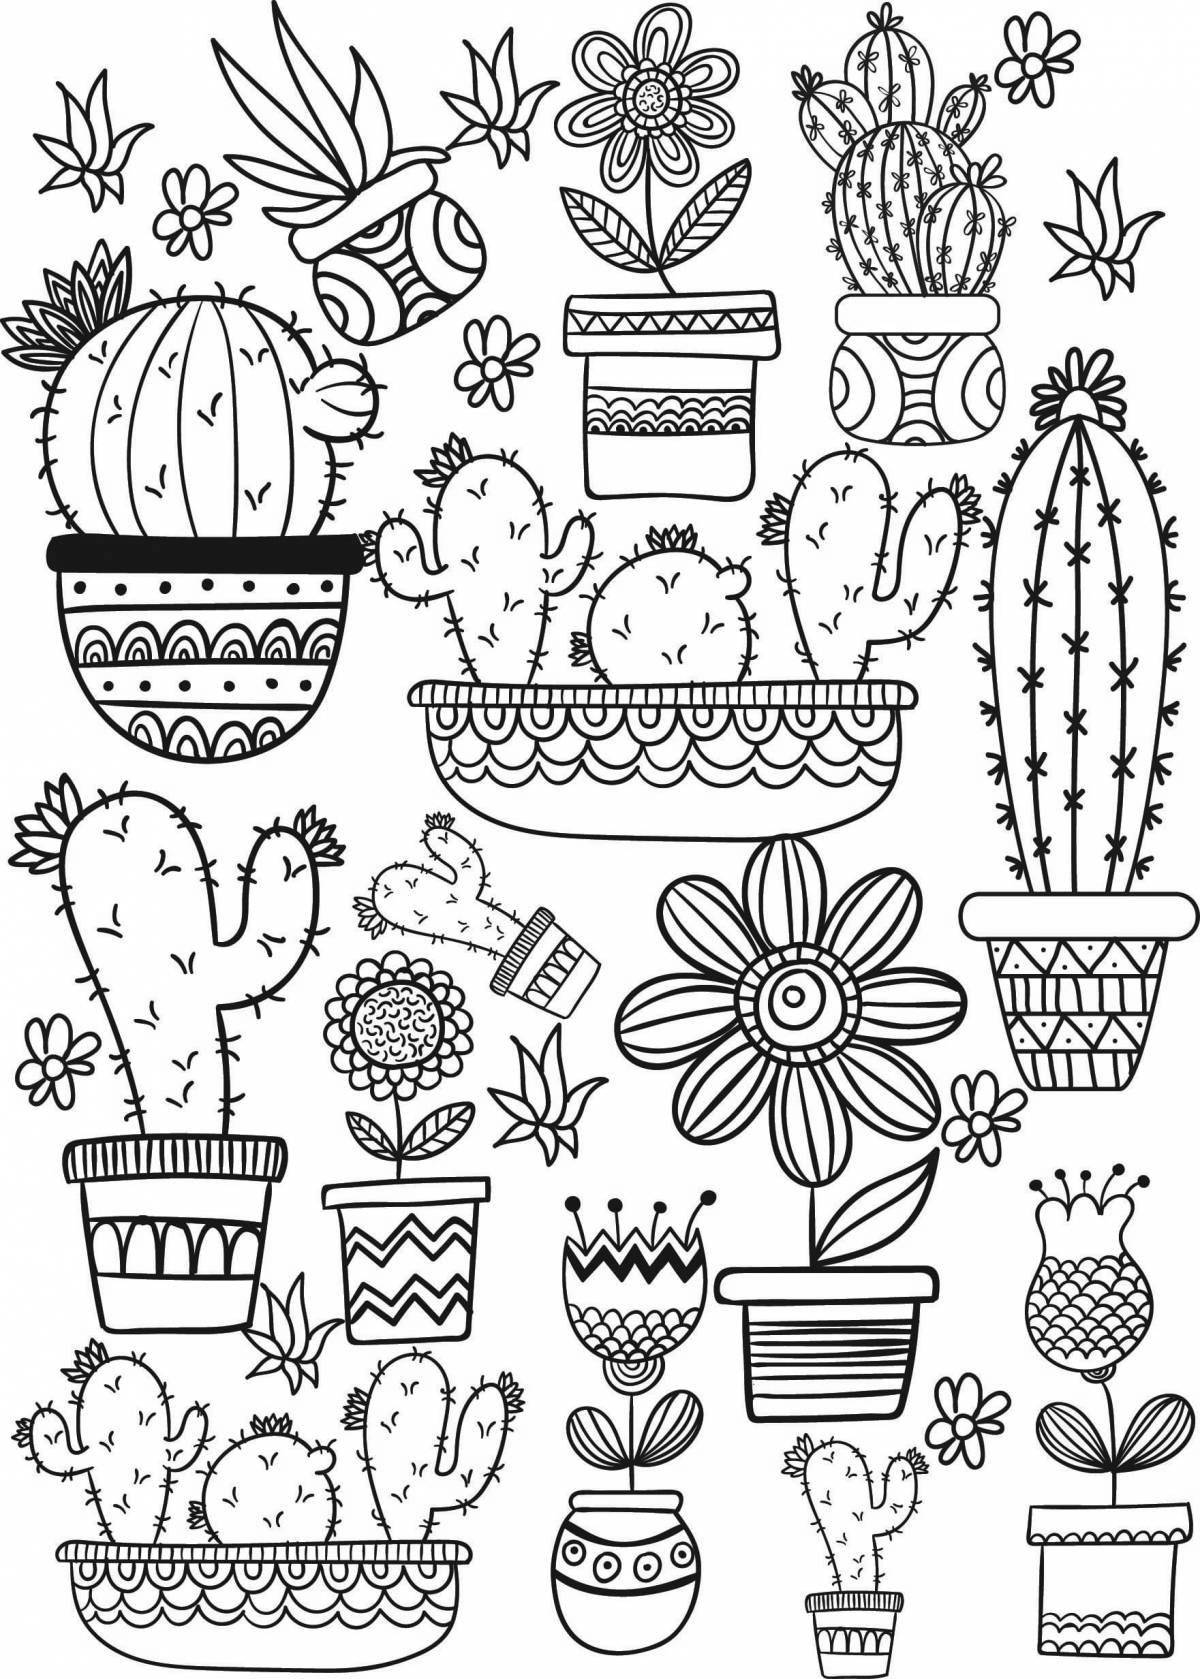 Pinterest animated coloring page